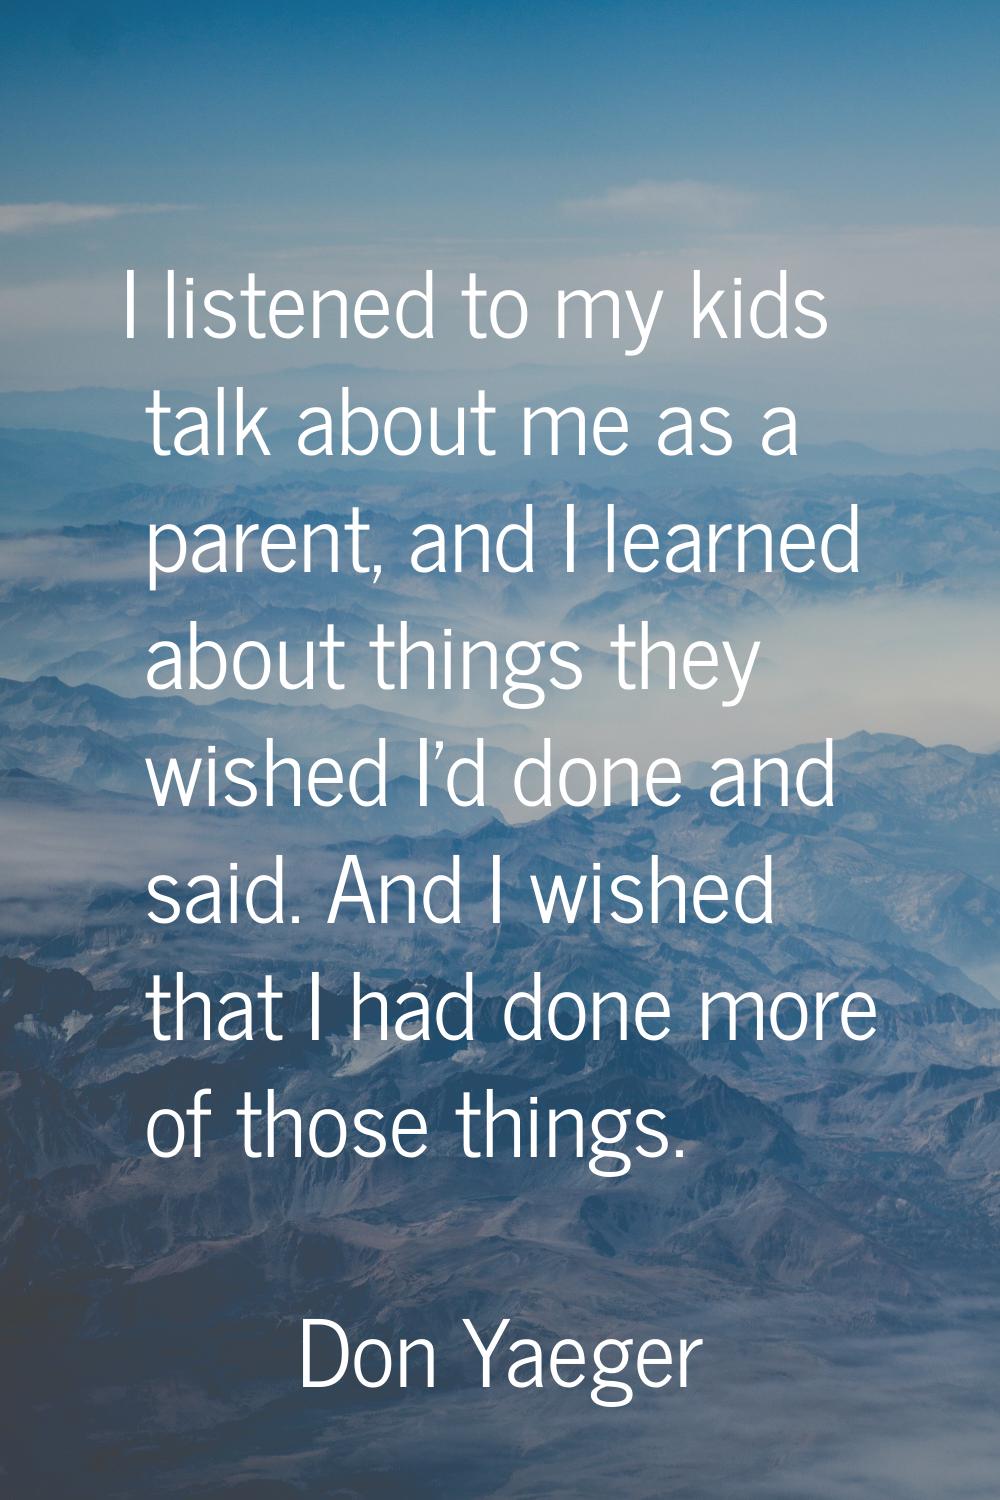 I listened to my kids talk about me as a parent, and I learned about things they wished I'd done an